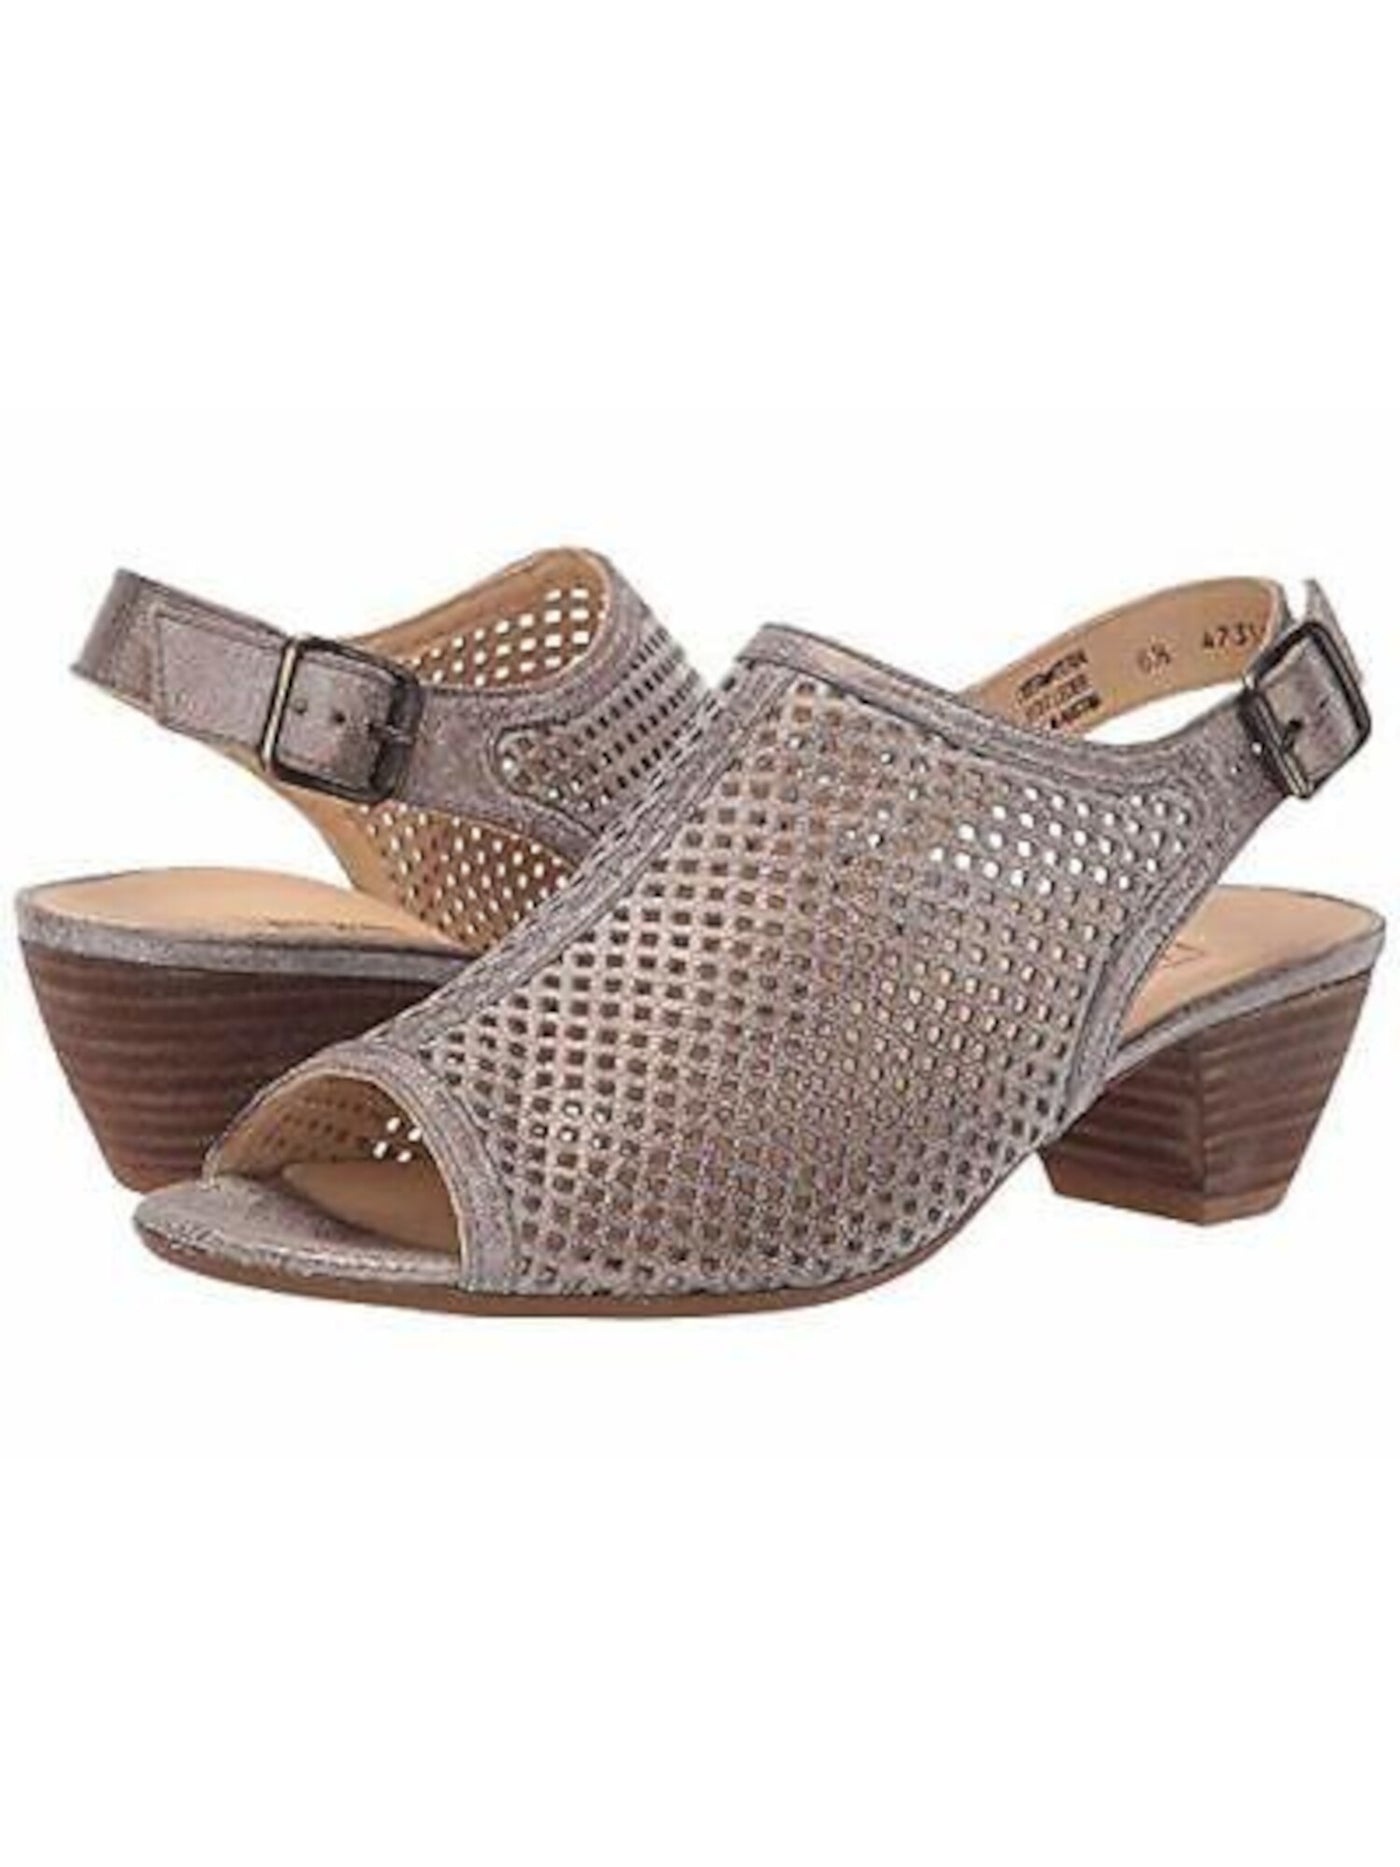 PAUL GREEN Womens Gray Perforated Adjustable Strap Arch Support Lois Almond Toe Block Heel Buckle Leather Slingback Sandal 3.5